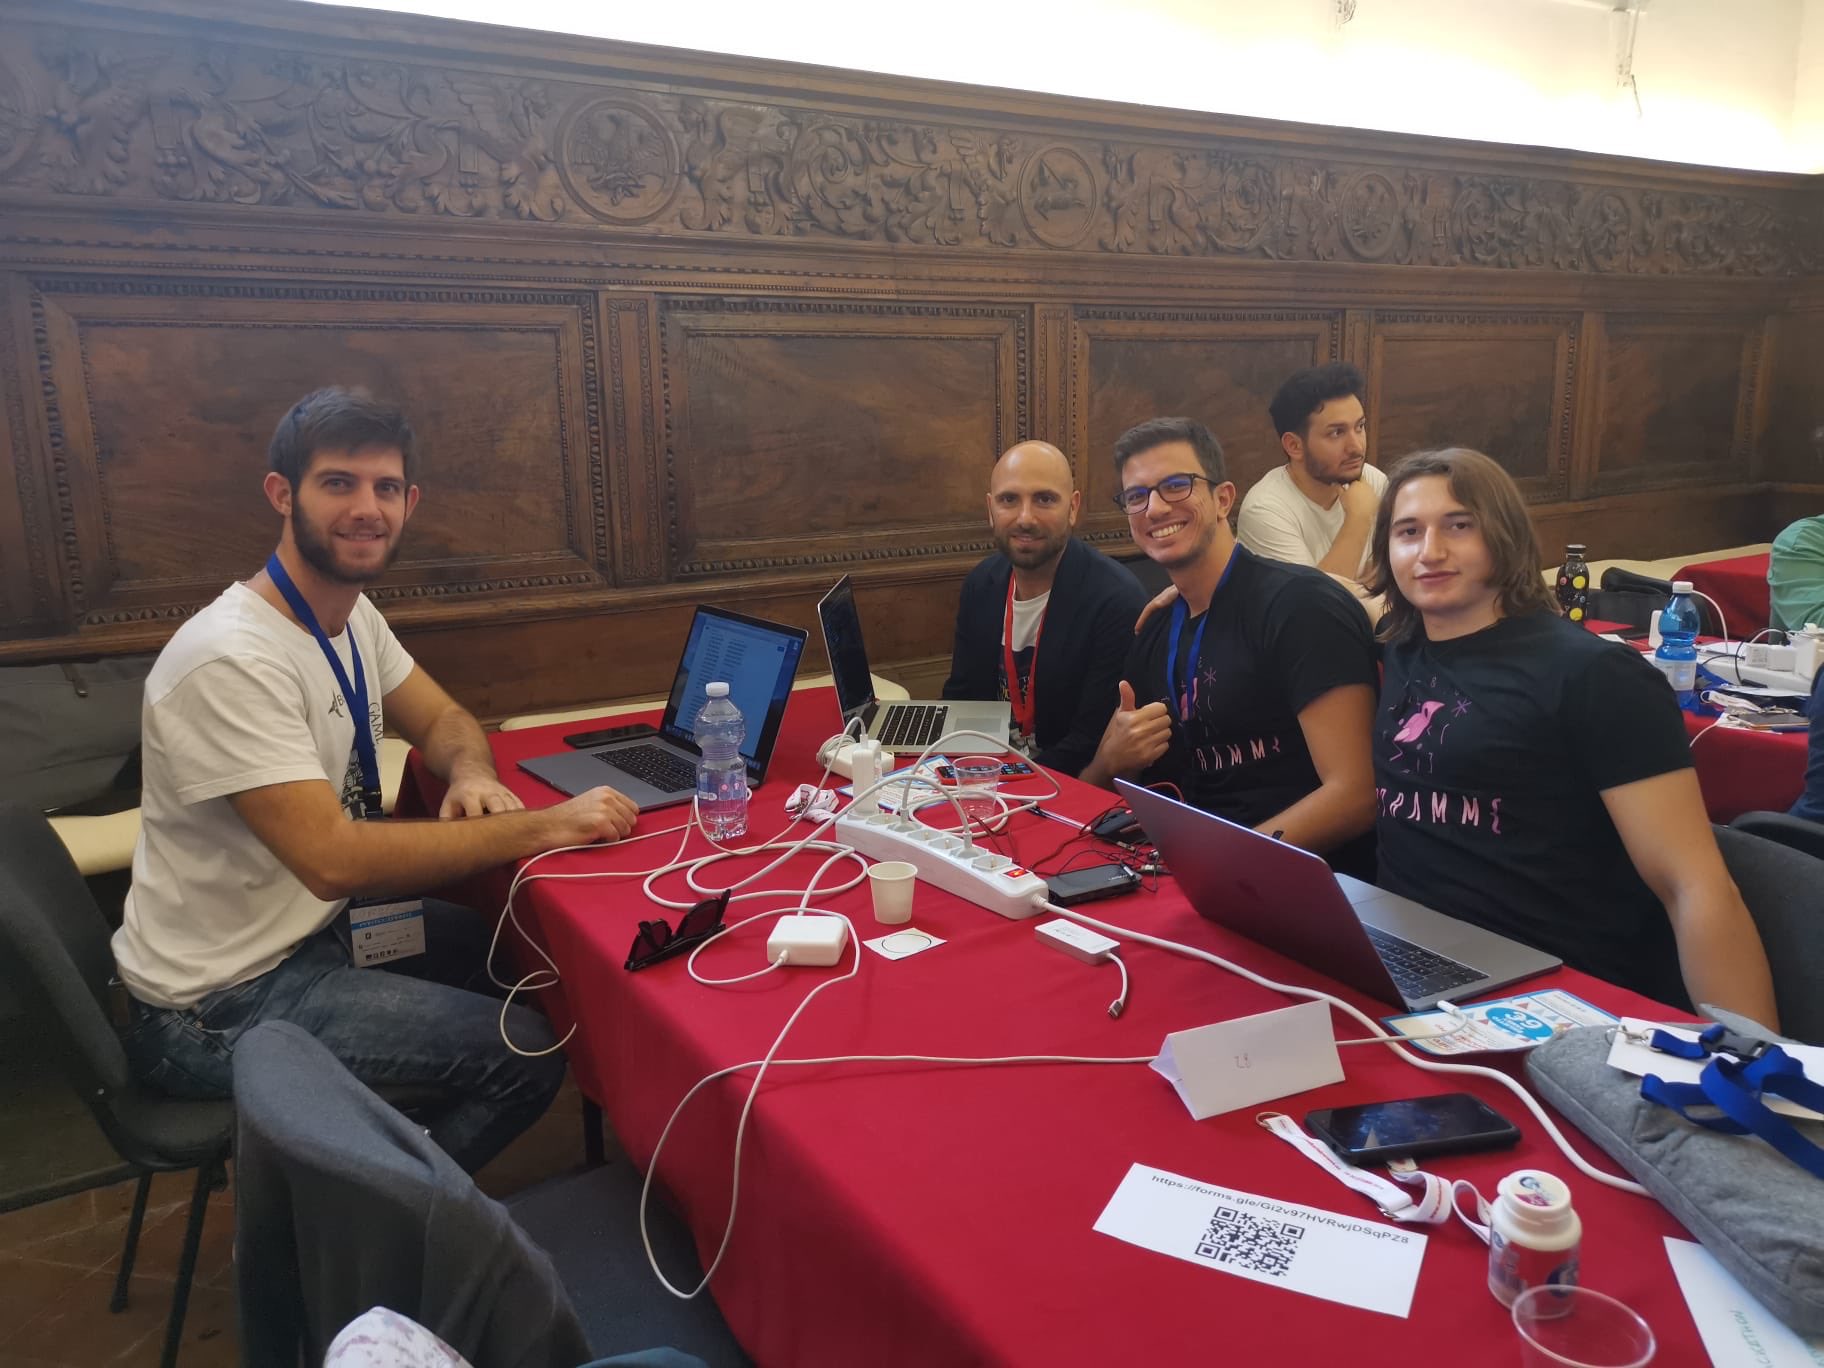 Marianna Culosi V Twitter And A Second Team Selected Cisco Challenge And Webexteams Api Hacknight19 With Our Partner In Crime Consorzio Clara And Our Fabulous Mentors Gaia Ambrosino Affinitoantonia And Lorenzoferraro0 Go